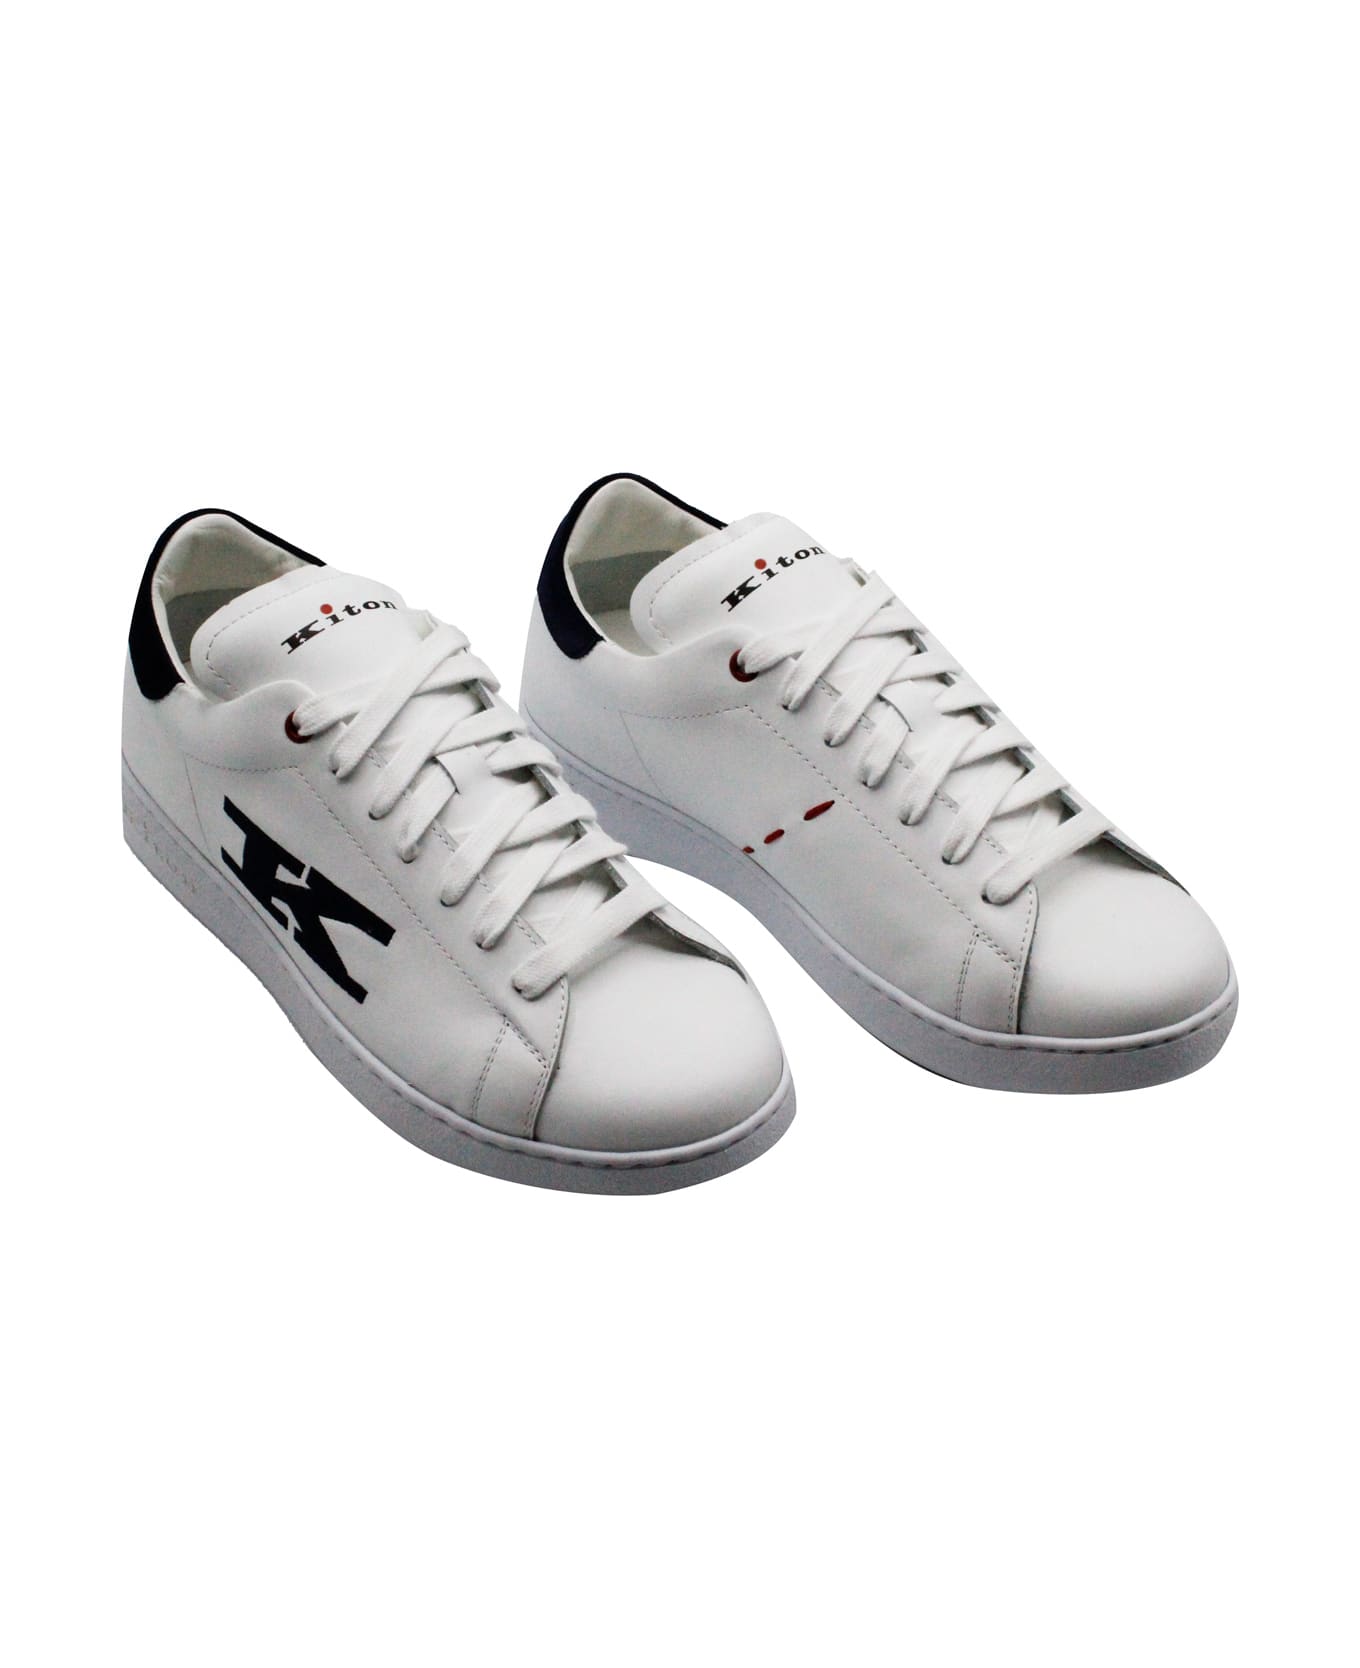 Kiton Sneackers Shoe In Leather With Suede Trims And With Contrasting Stitching. - White